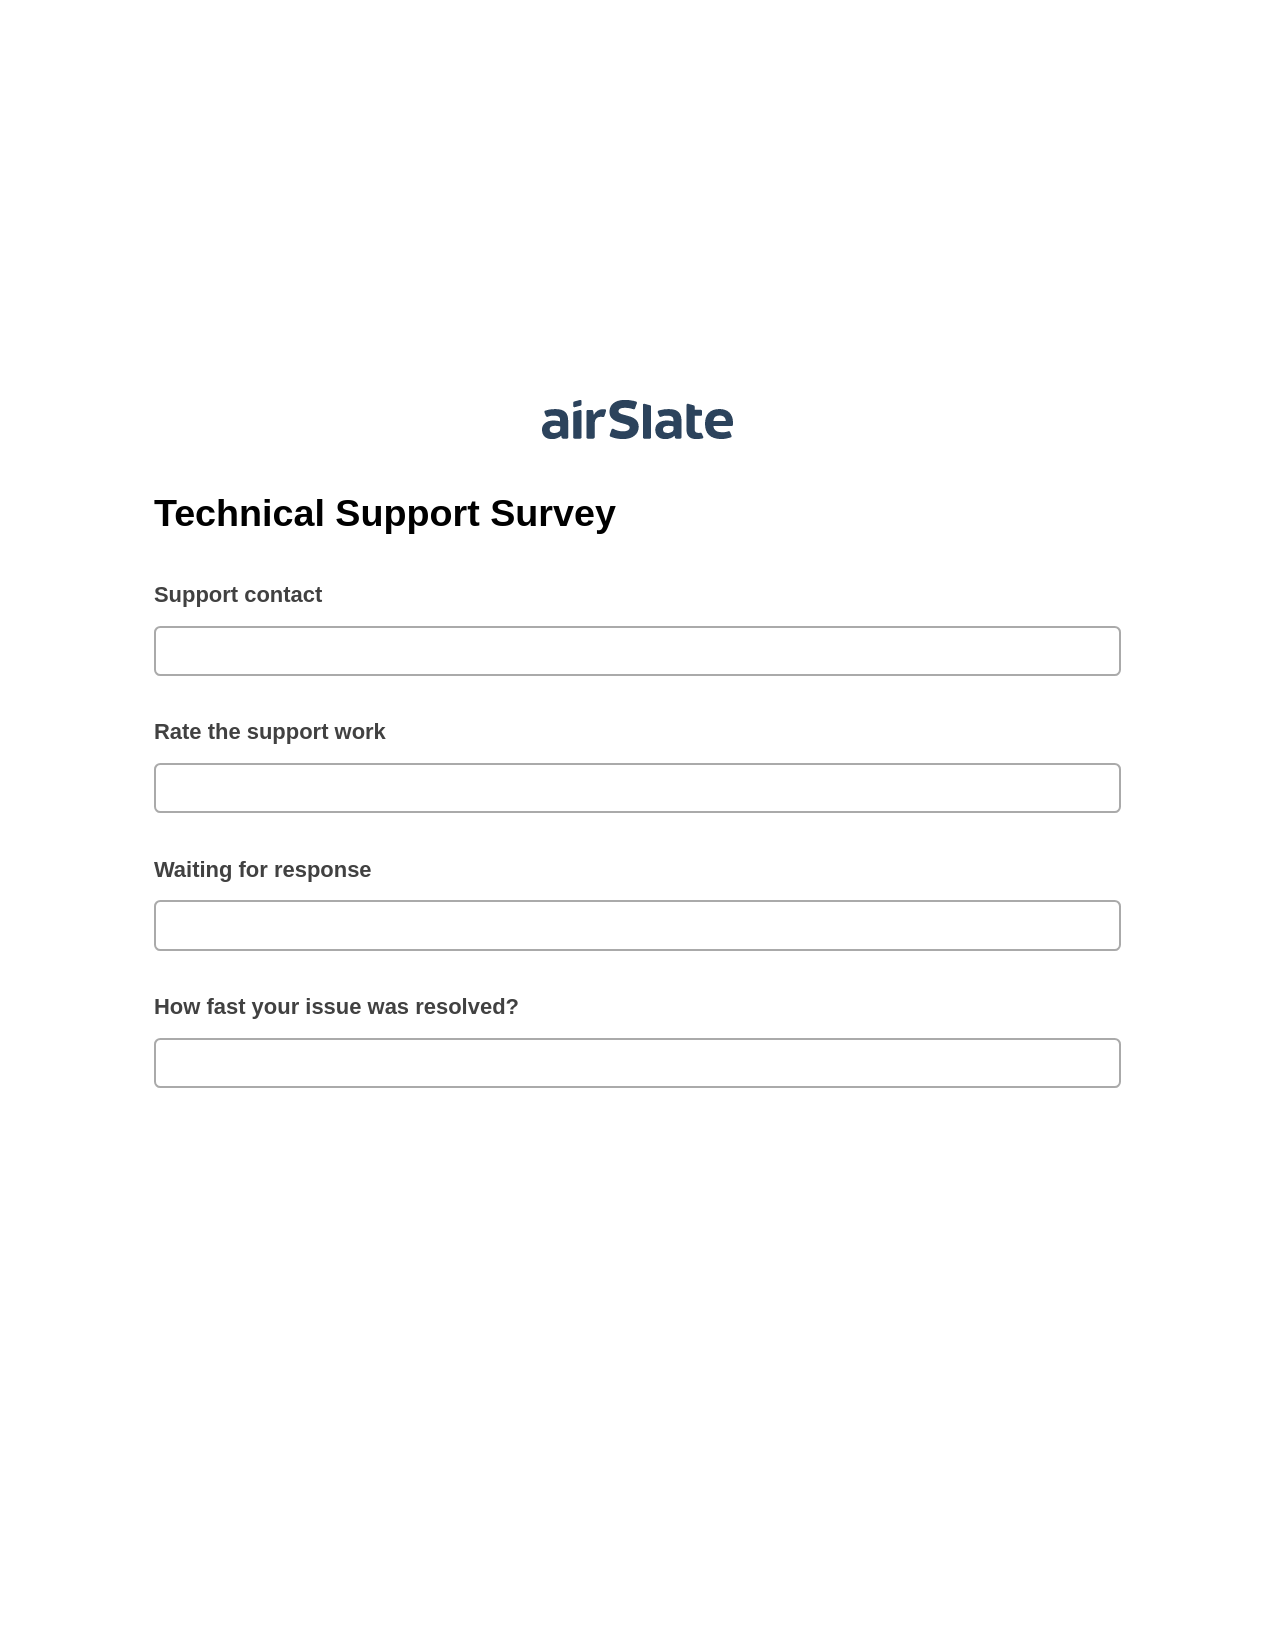 Technical Support Survey Pre-fill from Salesforce Records with SOQL Bot, Create slate addon, Archive to OneDrive Bot